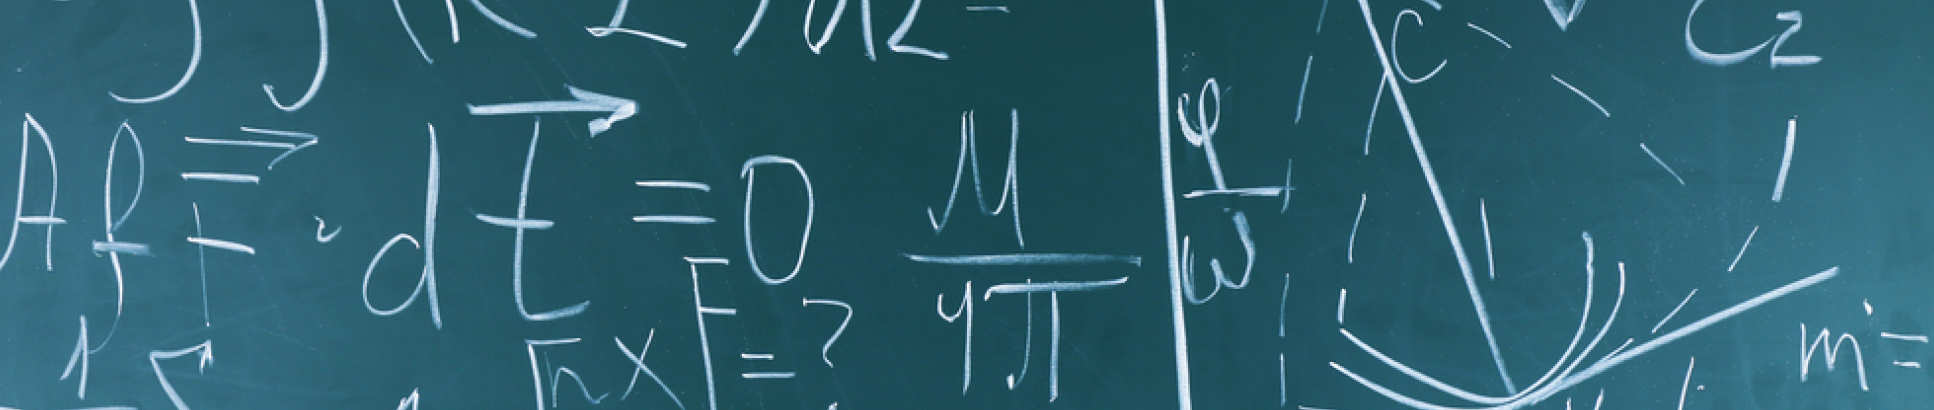 Maths equations on a board